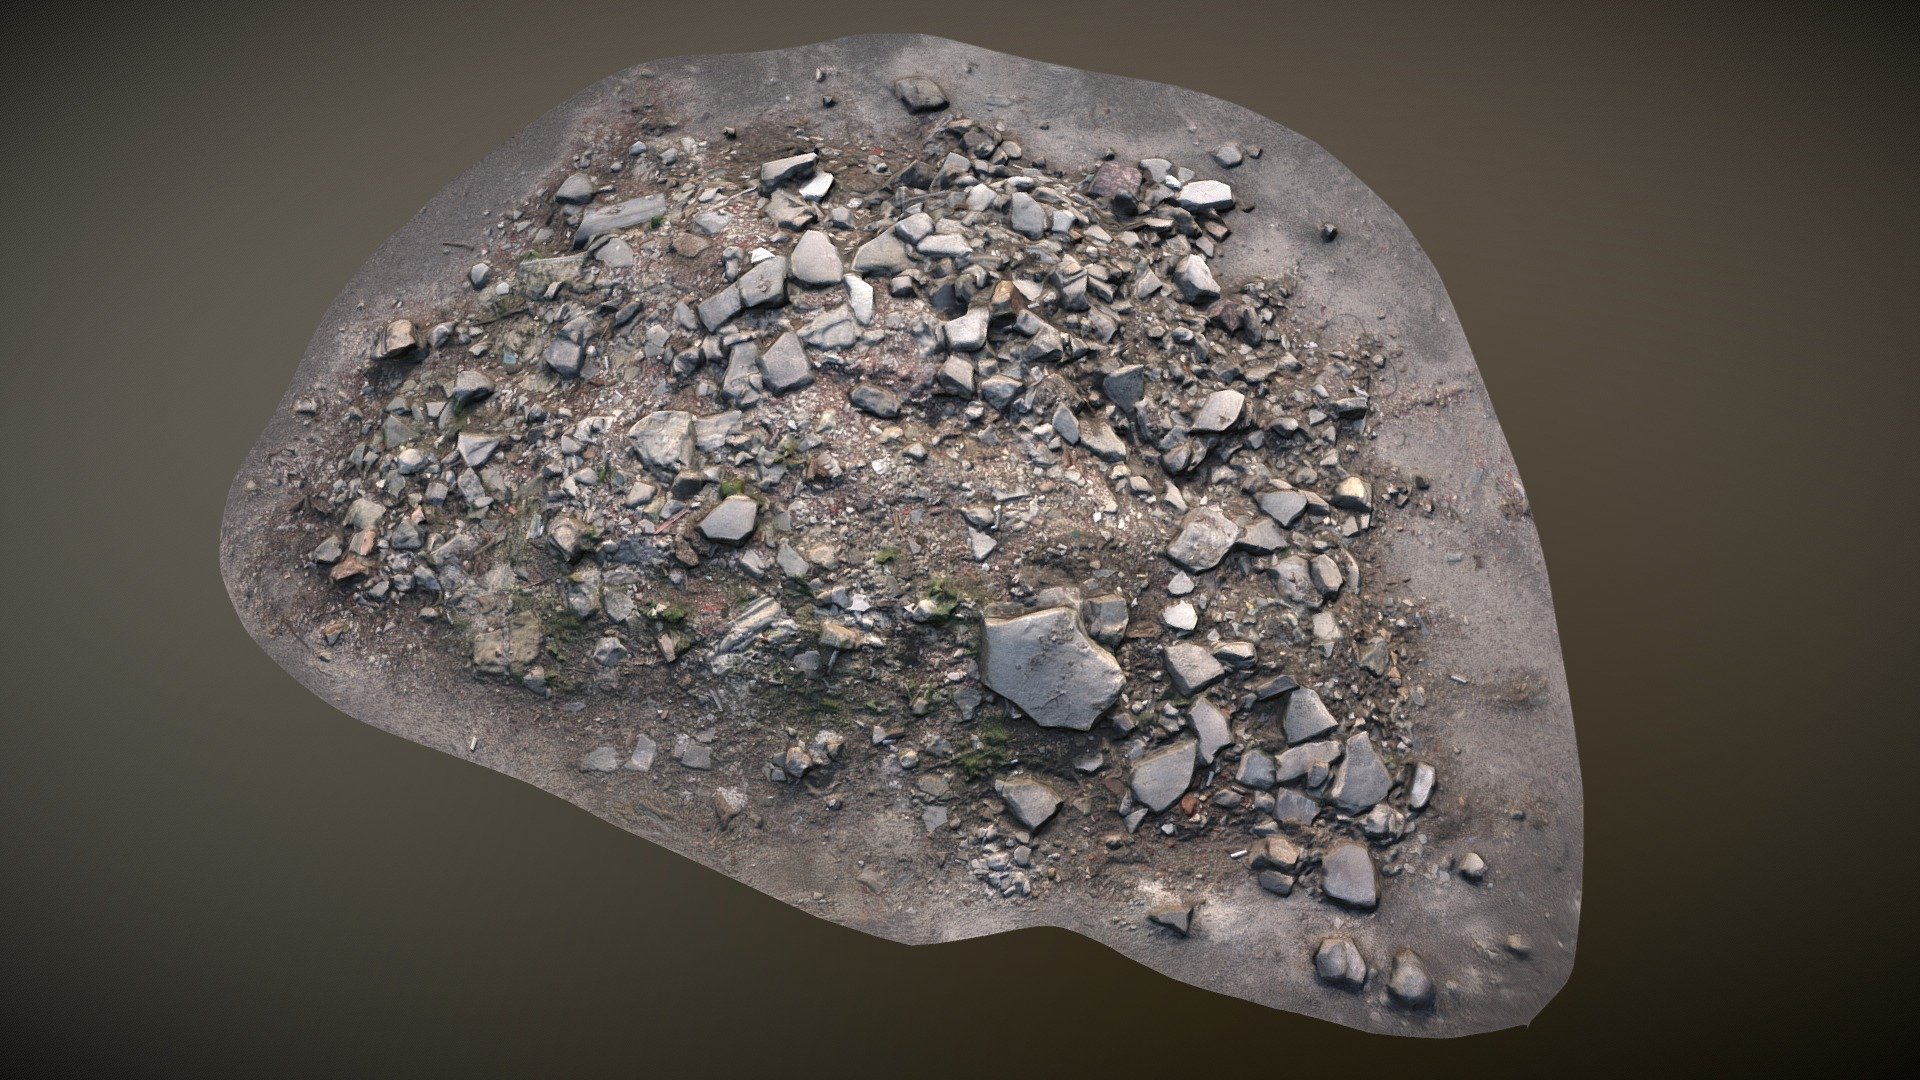 Pile of construction waste

8K PBR Material
High quality Photogrammetry
Ready for games and scenes
 - Pile of construction waste [3D SCAN; 8K; PBR] - Download Free 3D model by MrUnity (@MrUnityCreations) 3d model